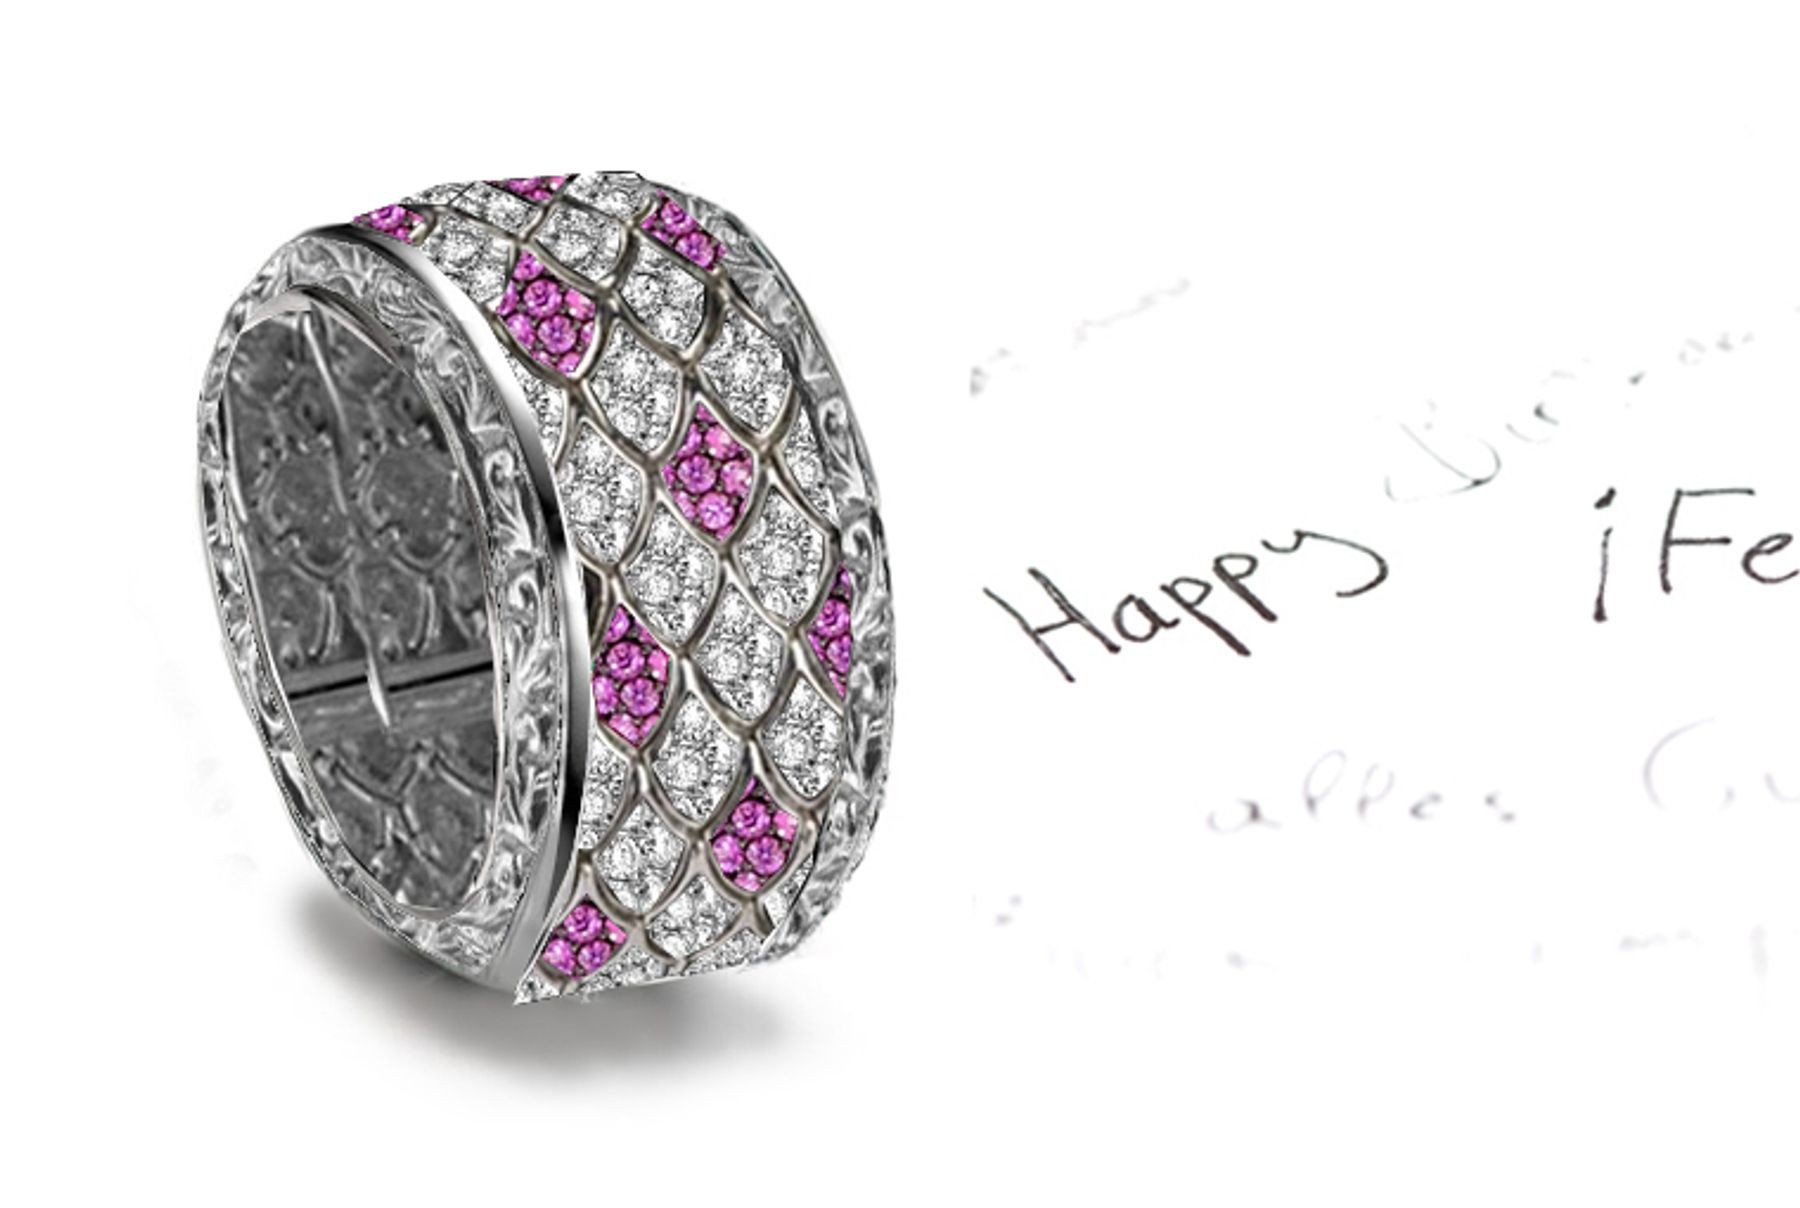 Impeccable: Pink Sapphires and Diamonds in Vintage Modern Settings